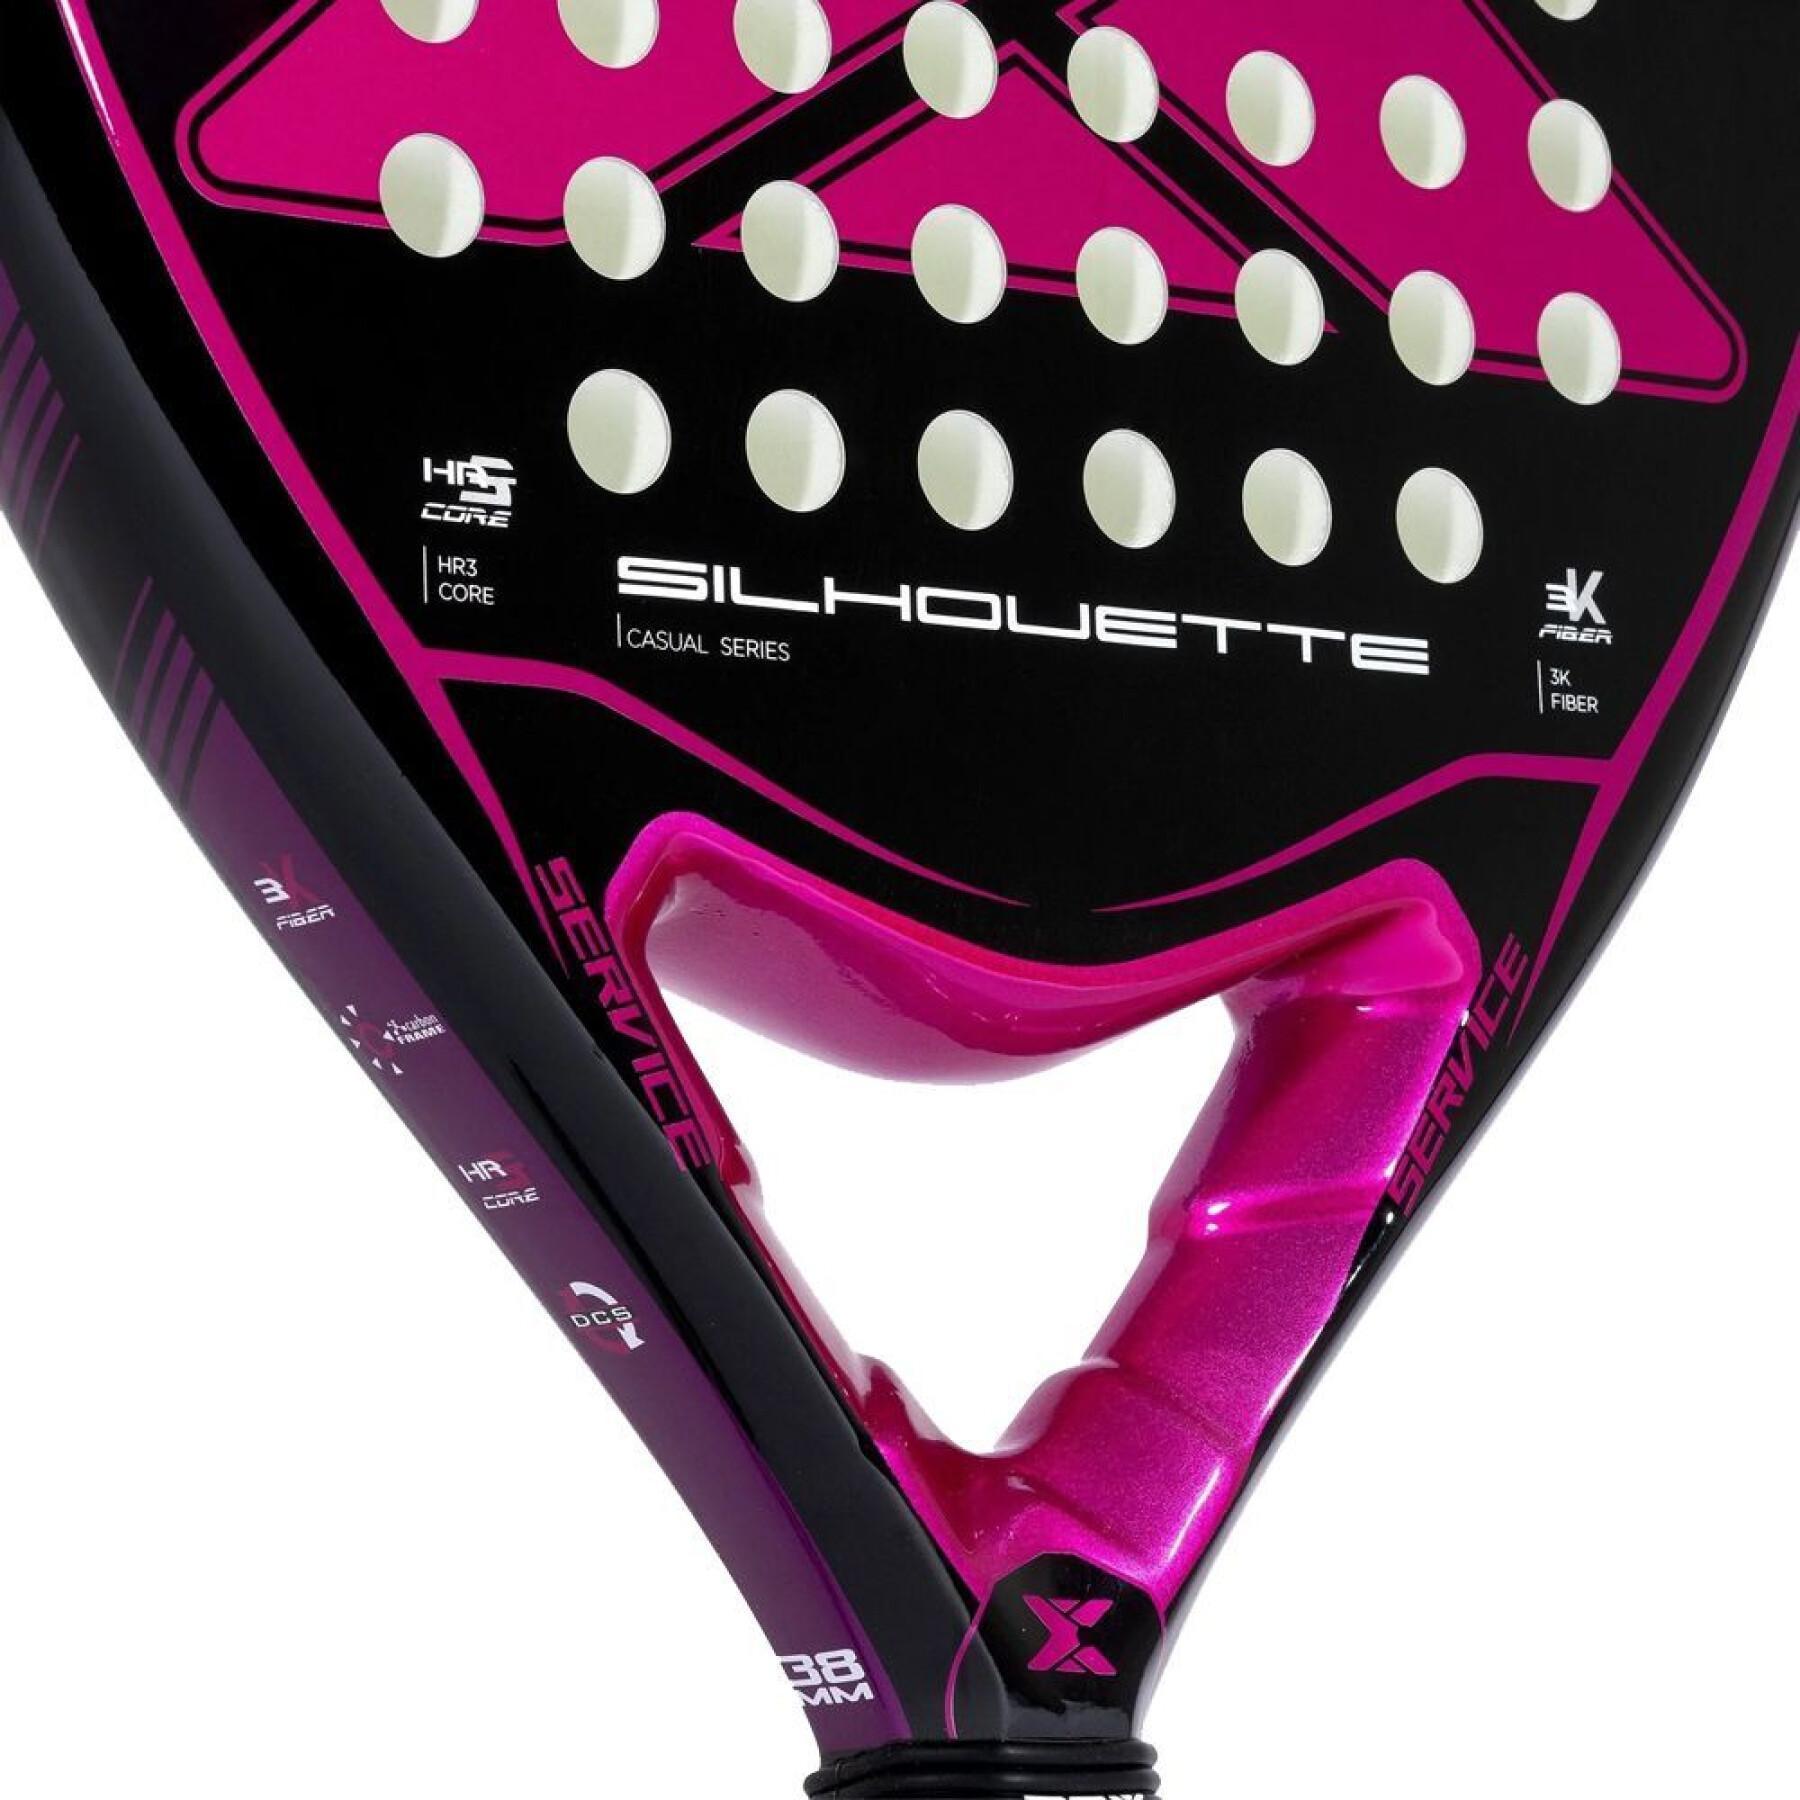 Racket from padel Nox Silhoutte Casual Series